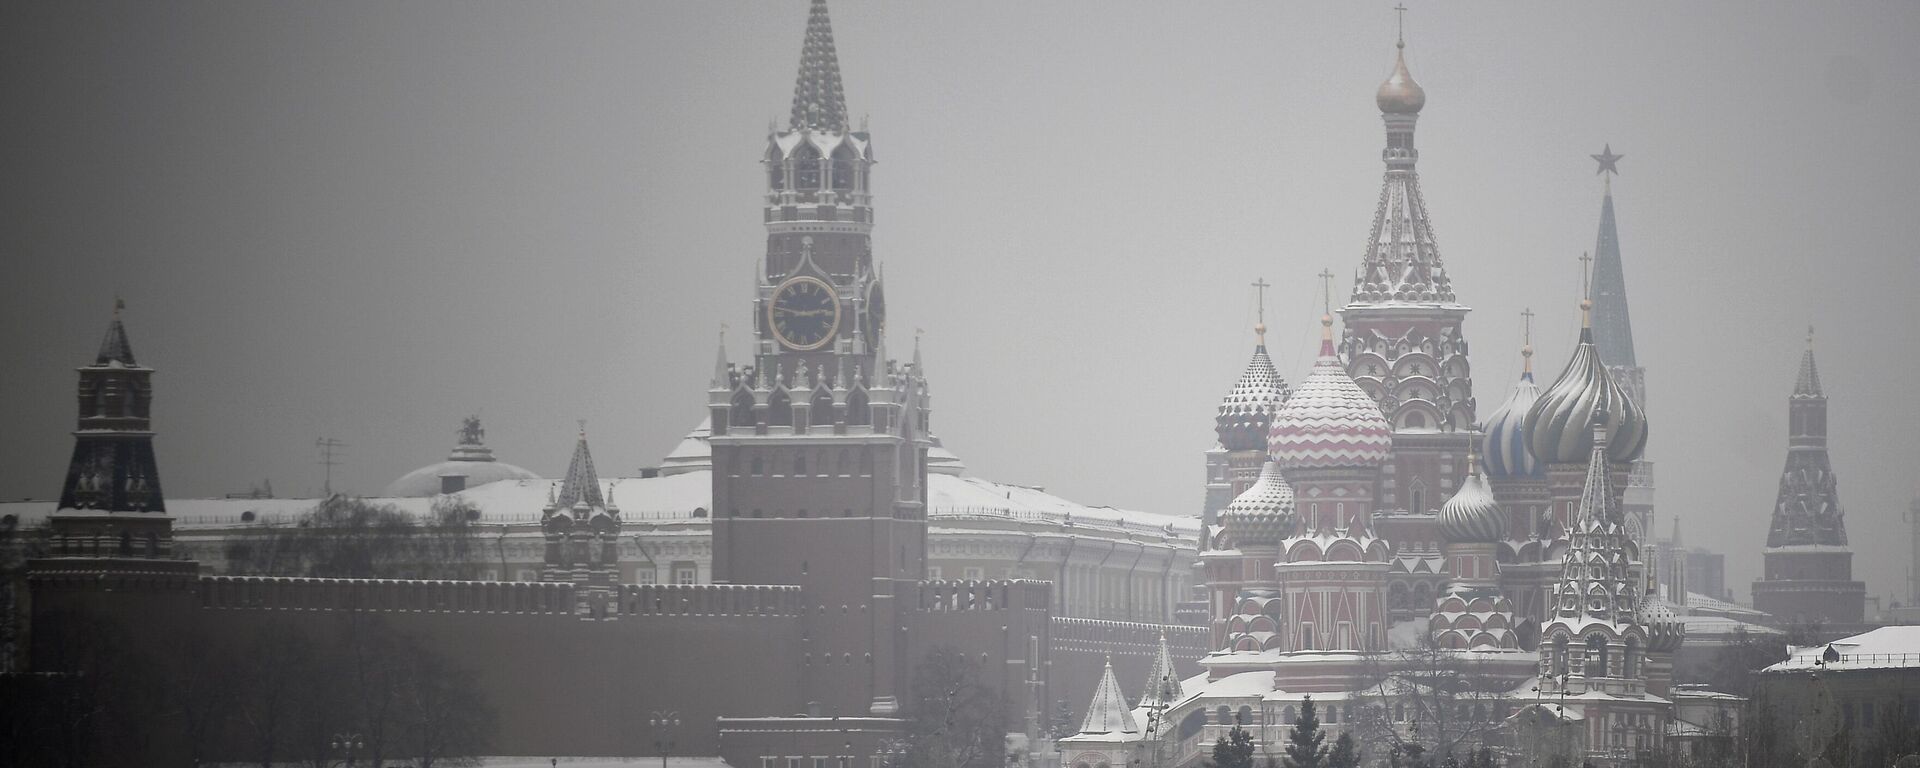 Spasskaya Tower and St. Basil's Cathedral are pictured on a foggy winter day, in downtown Moscow, Russia. - Sputnik International, 1920, 29.12.2023